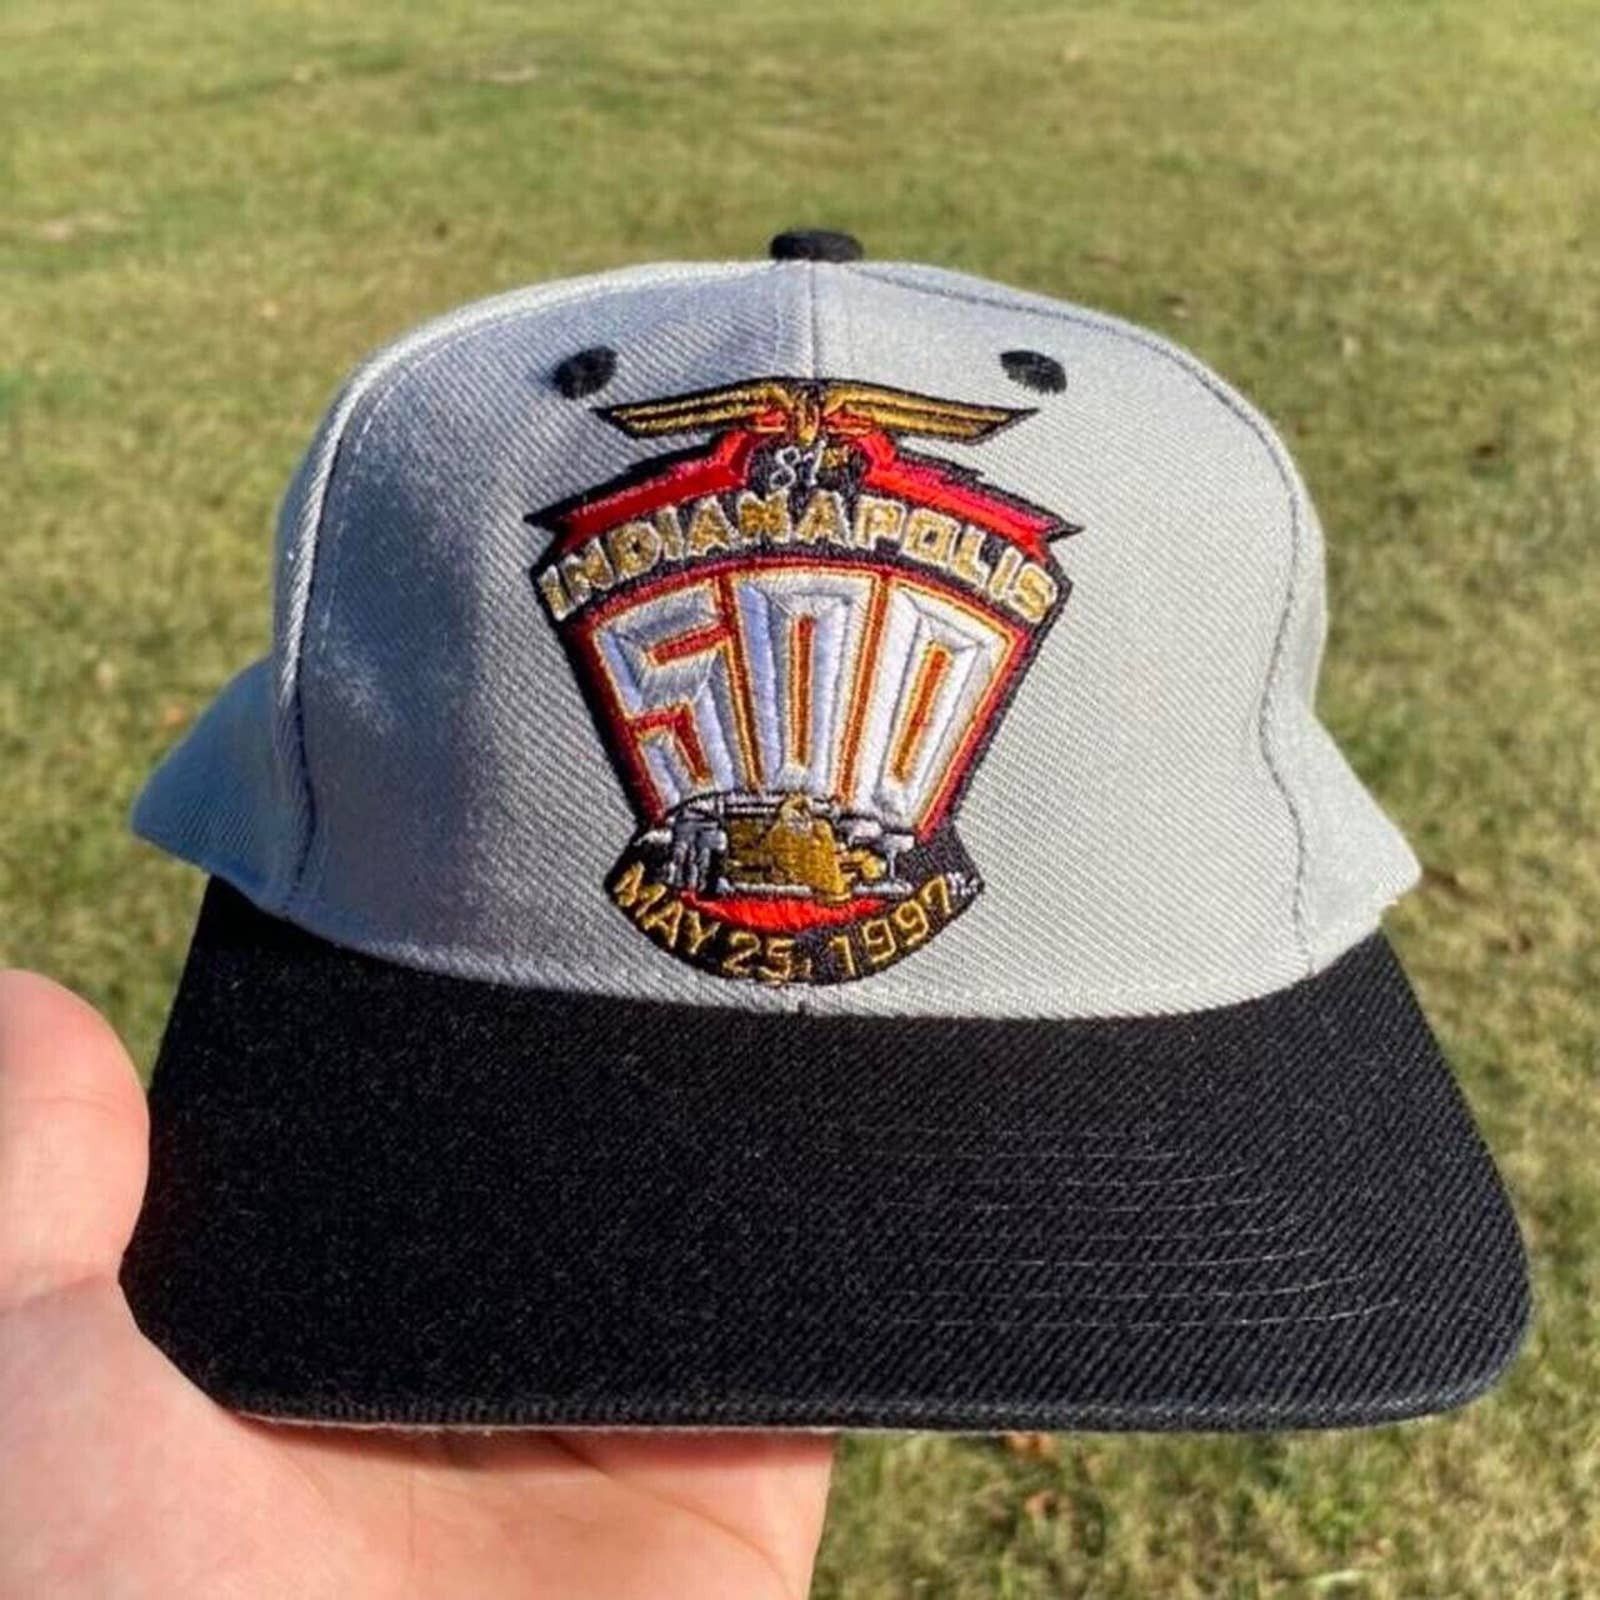 NASCAR Vintage Indy 500 NASCAR Racing SnapBack Hat Great Condition Size ONE SIZE - 1 Preview